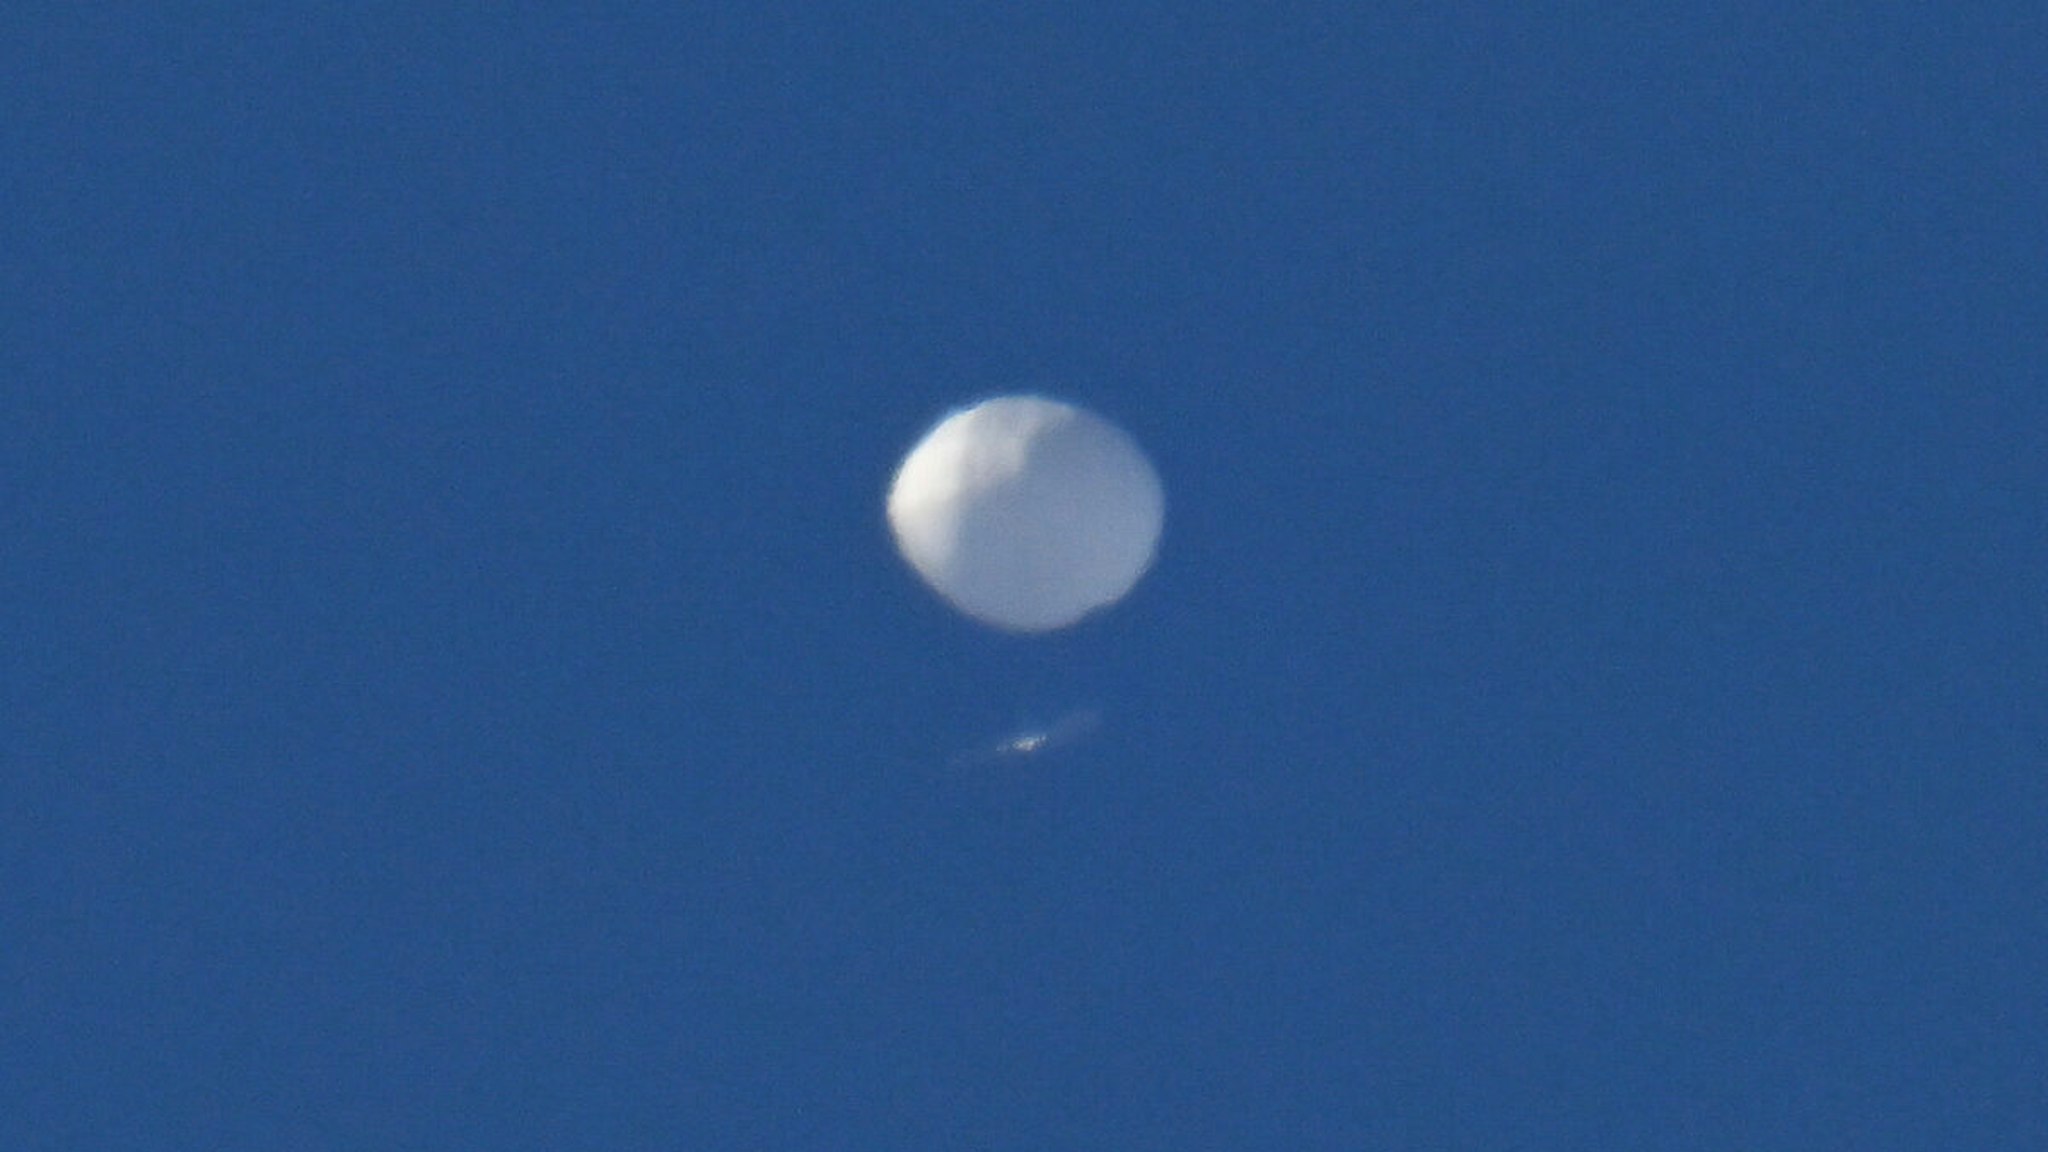 Chinese spy balloon flies above in Charlotte NC, United States on February 04, 2023. The Pentagon announced earlier that it is tracking a suspected Chinese high-altitude surveillance balloon above the continental US.